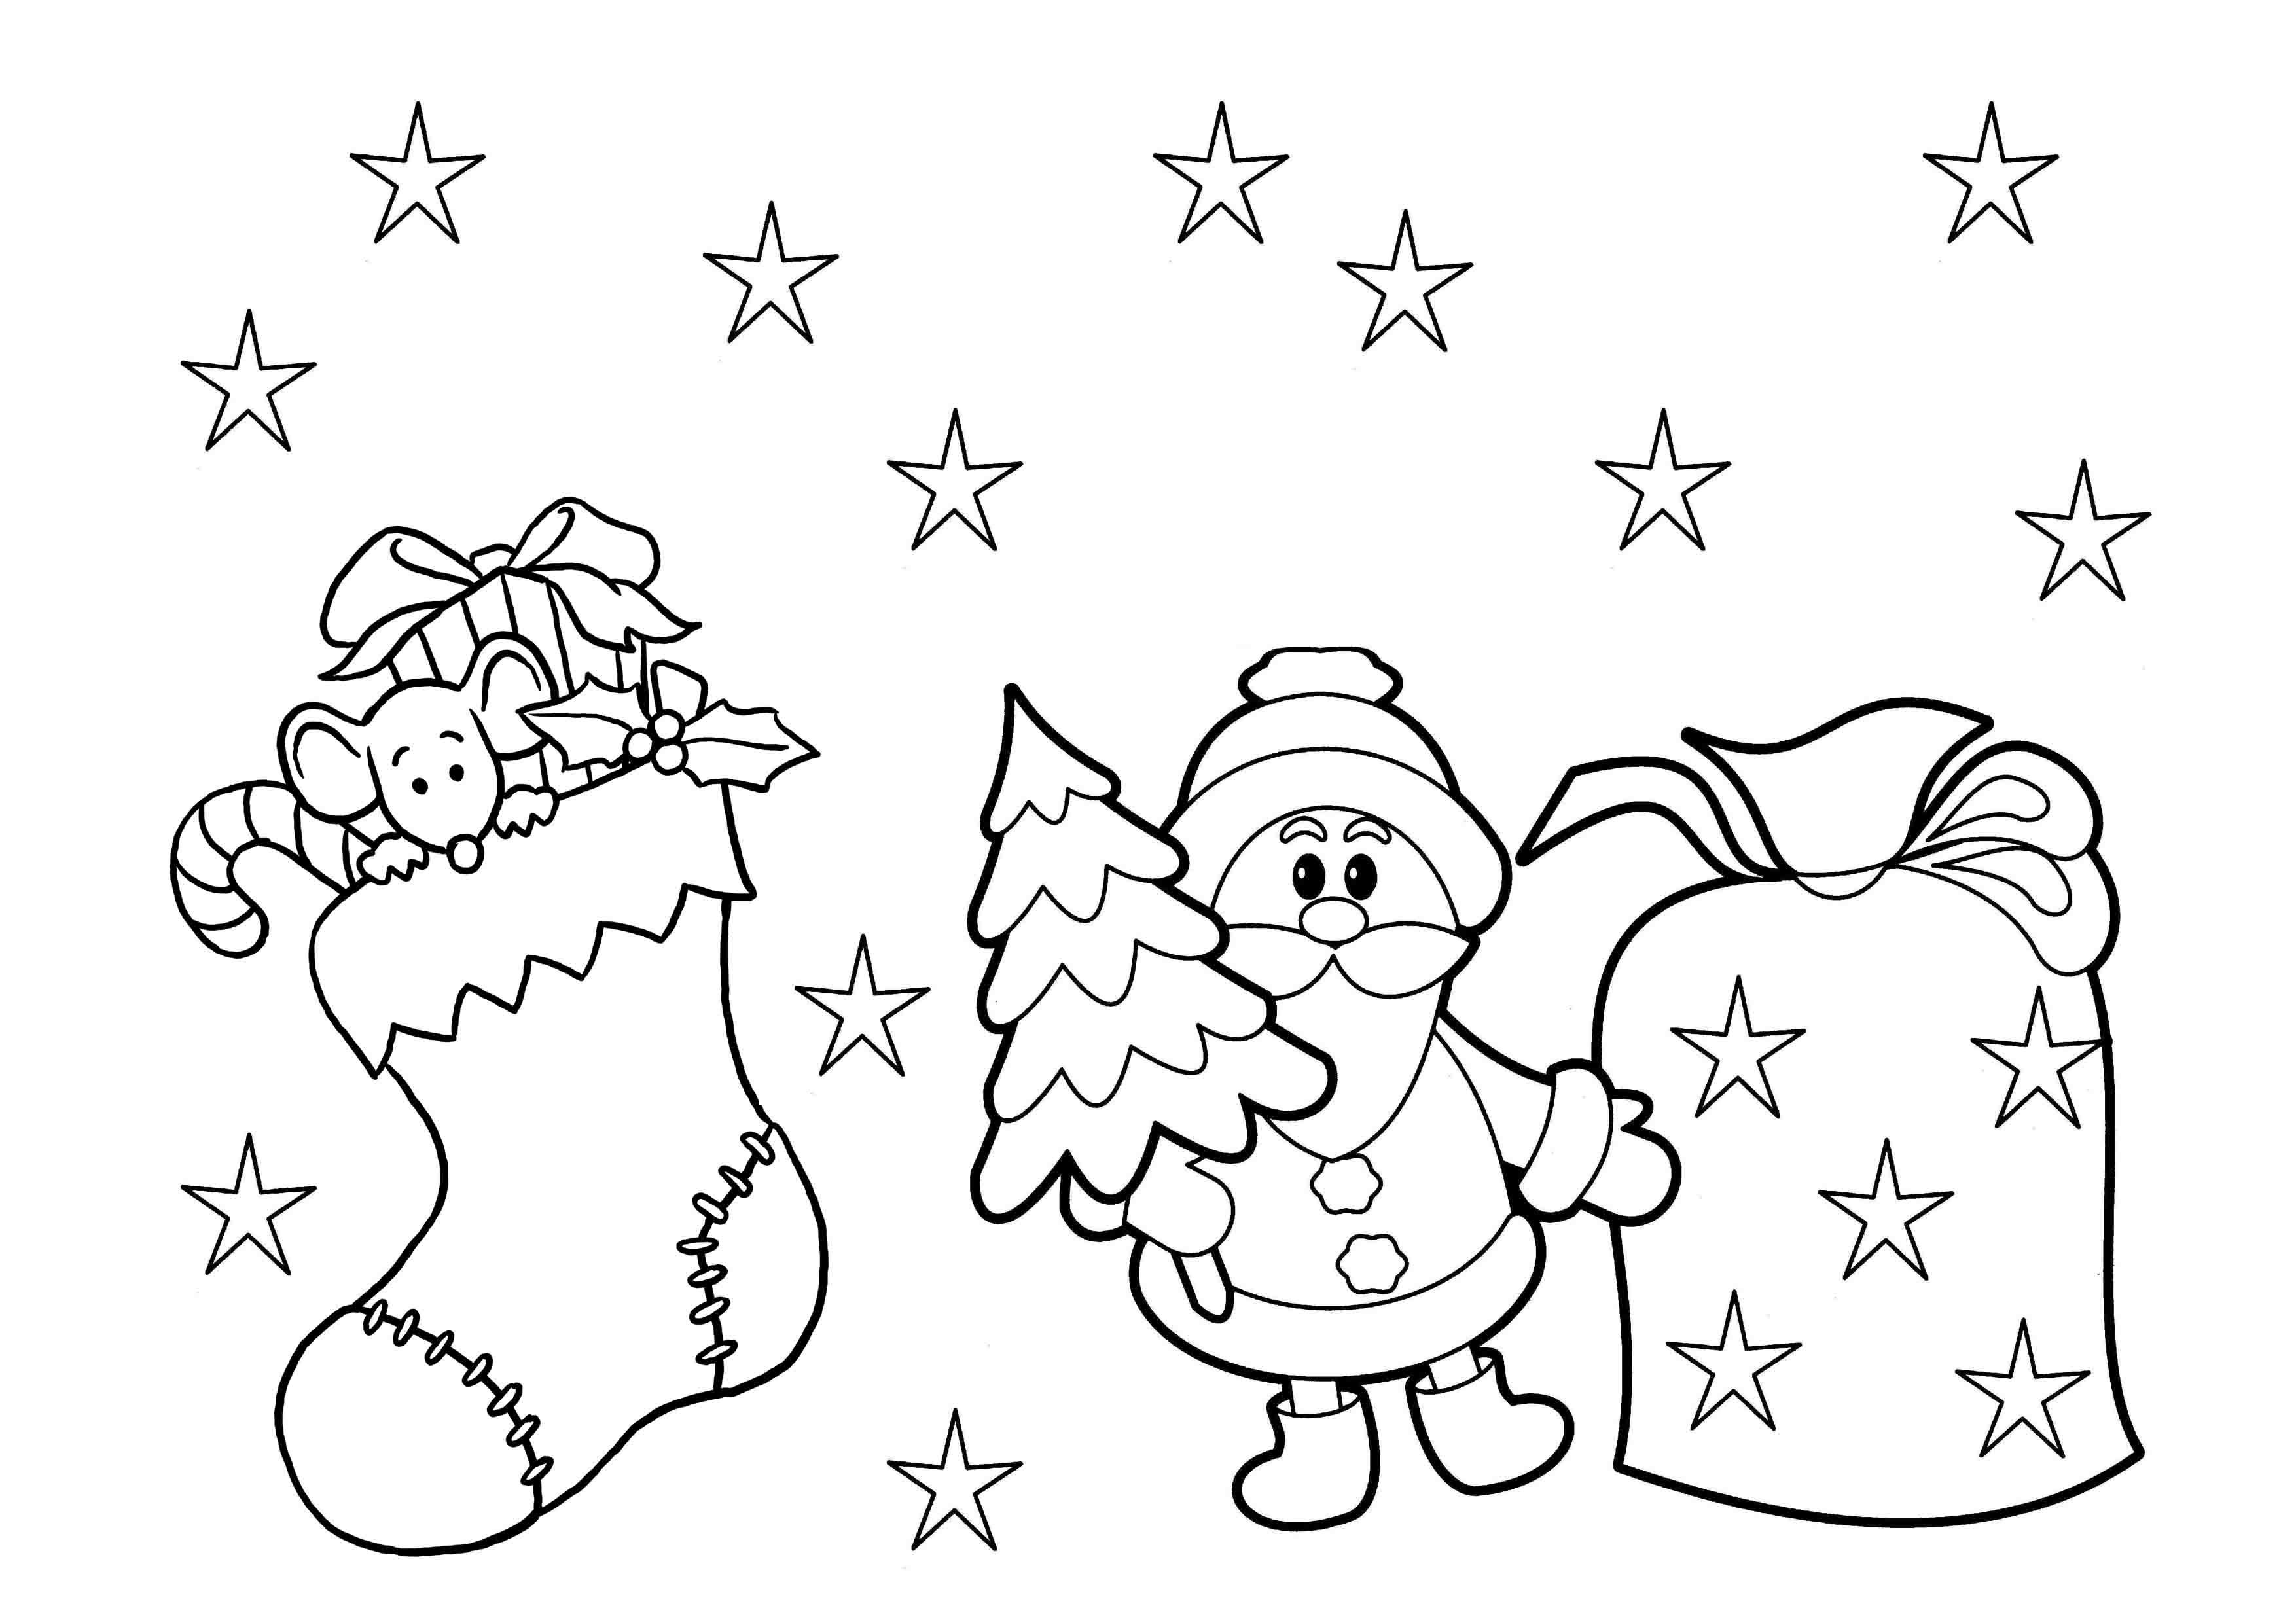 Free Printable Christmas Coloring Pages For Toddlers The Story Of Christmas A Mirror For Humans Part Ii Pulpenku